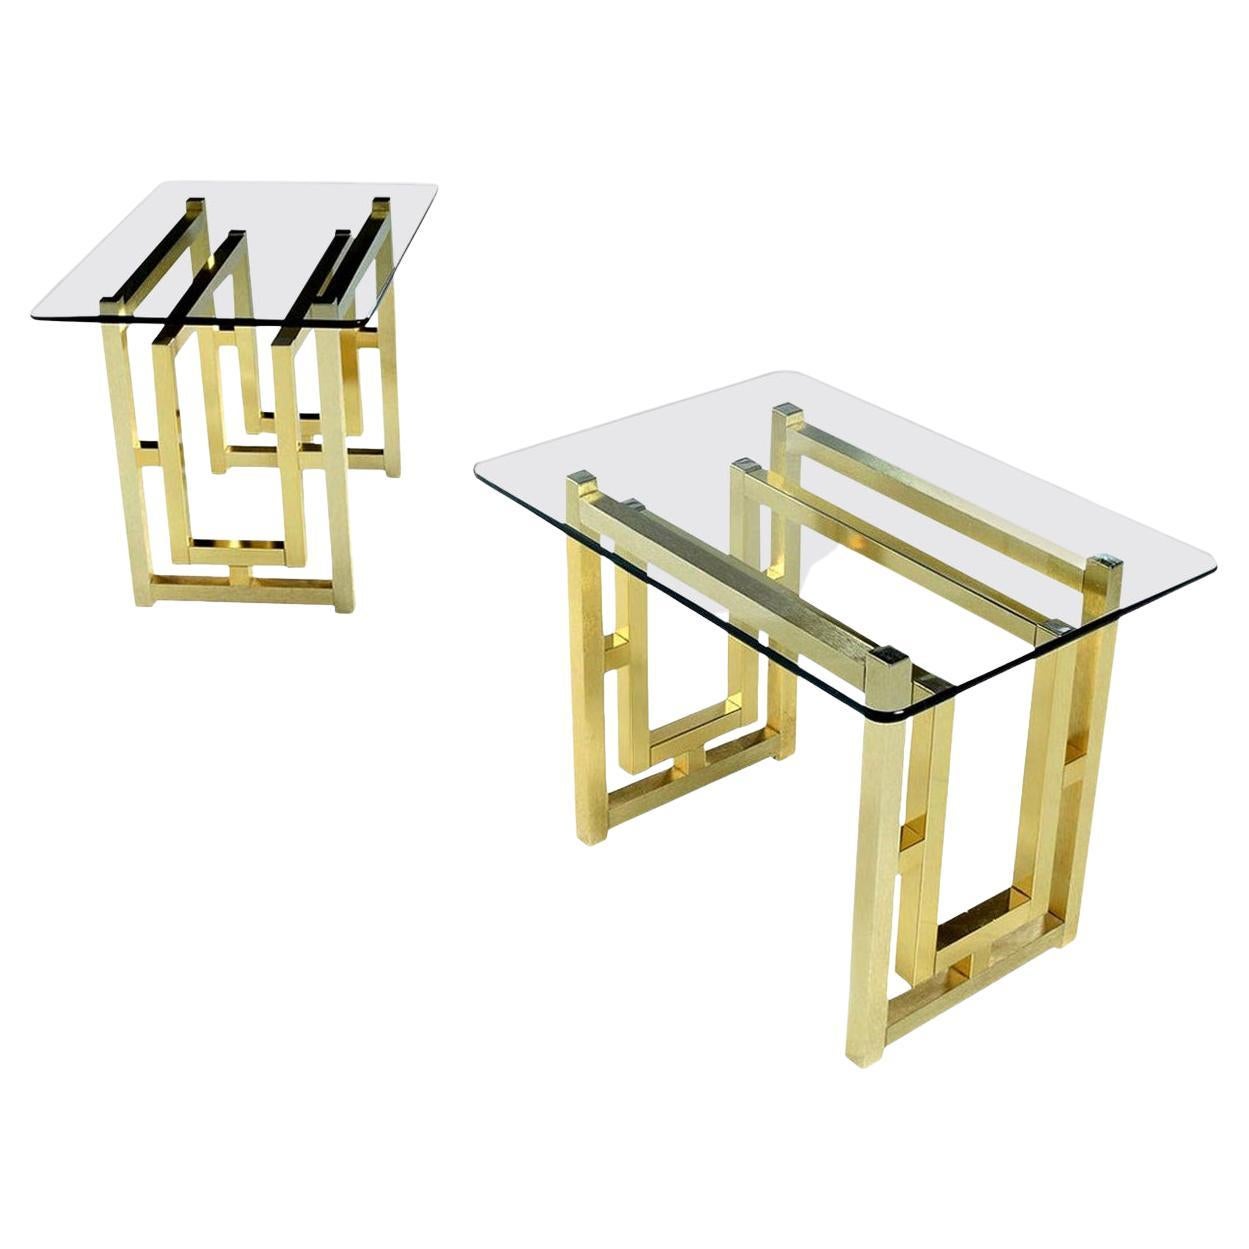 There's so much that's right about these Milo Baughman style side tables. The combination of both brushed and polished brass square tubular construction is perfectly artistic and architectural. Hollywood Regency and Mid-Century Modern intertwine